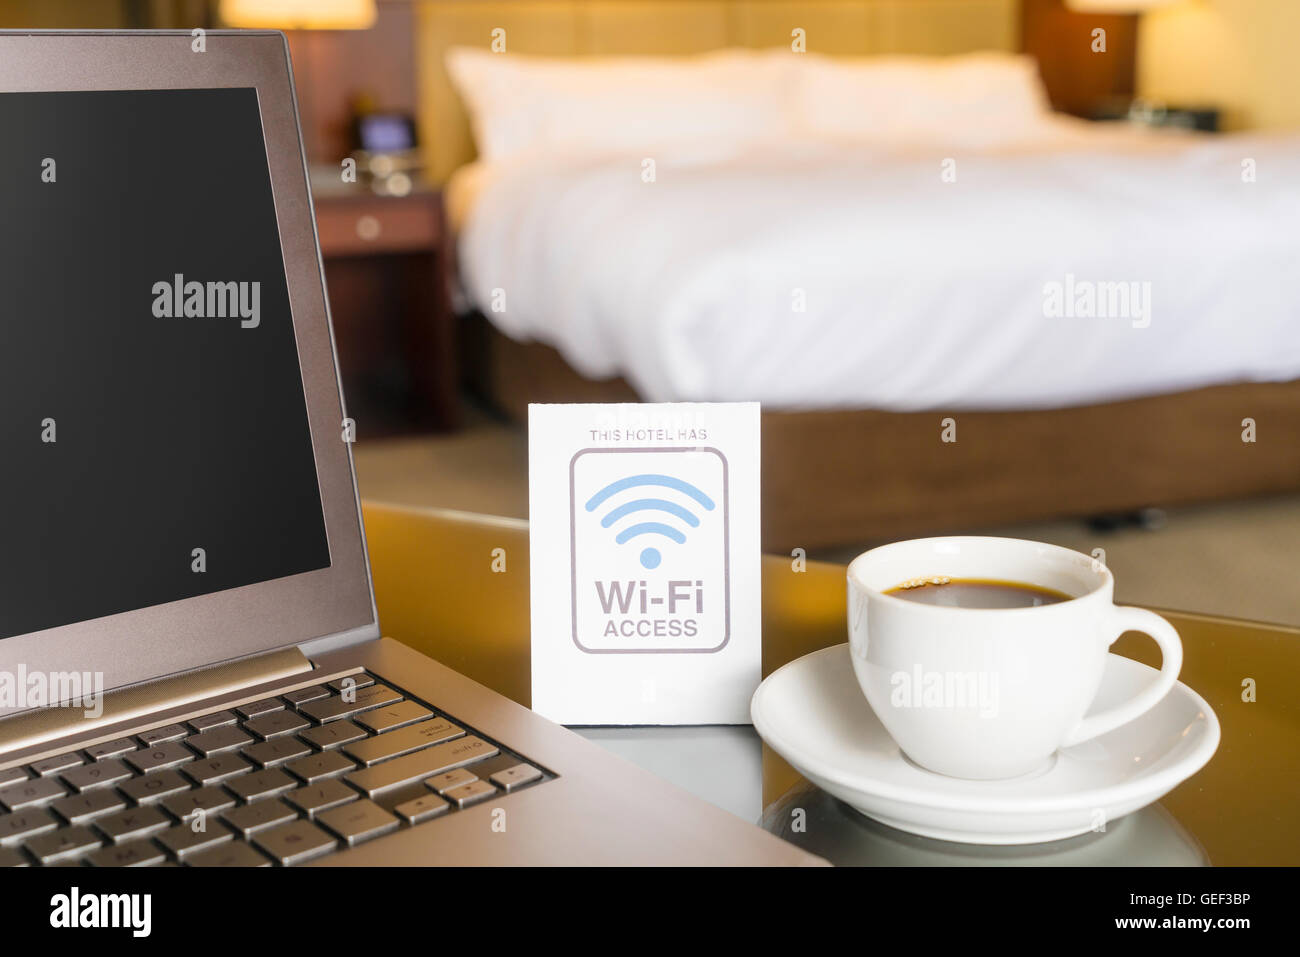 Hotel room with wifi access sign Stock Photo